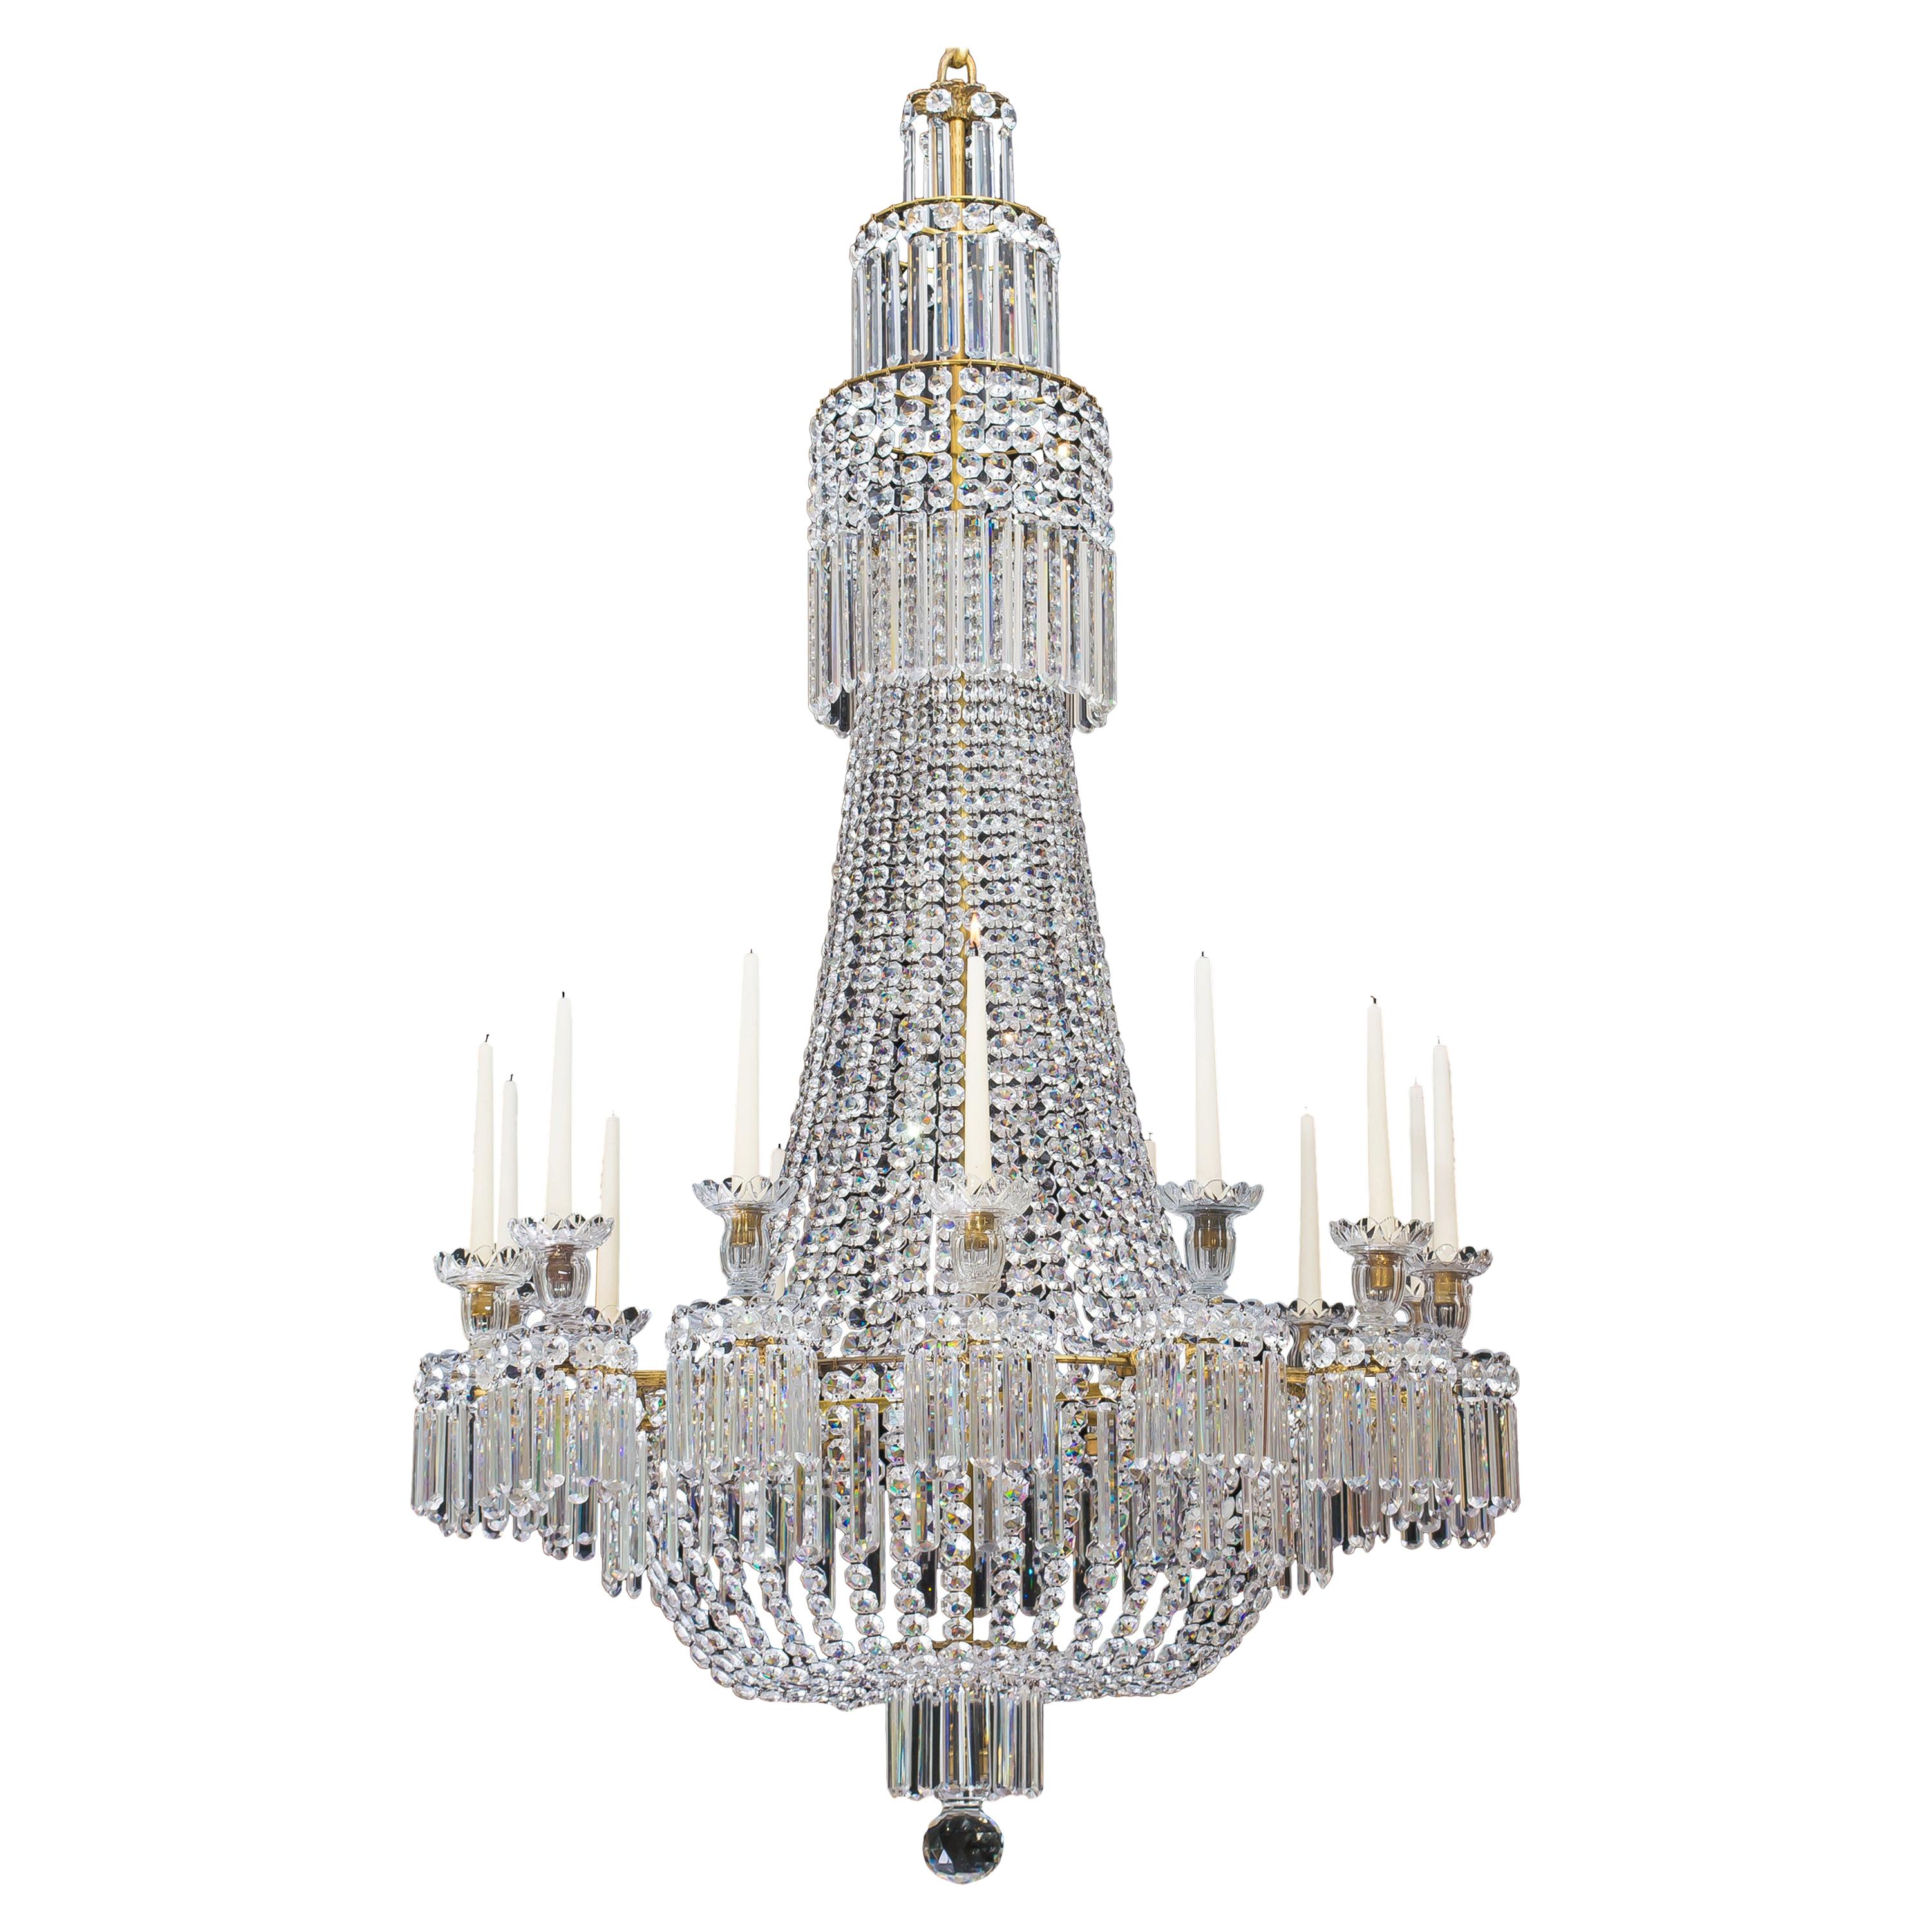 Regency Crystal Chandelier of Classic Tent and Basket Design by John Blades